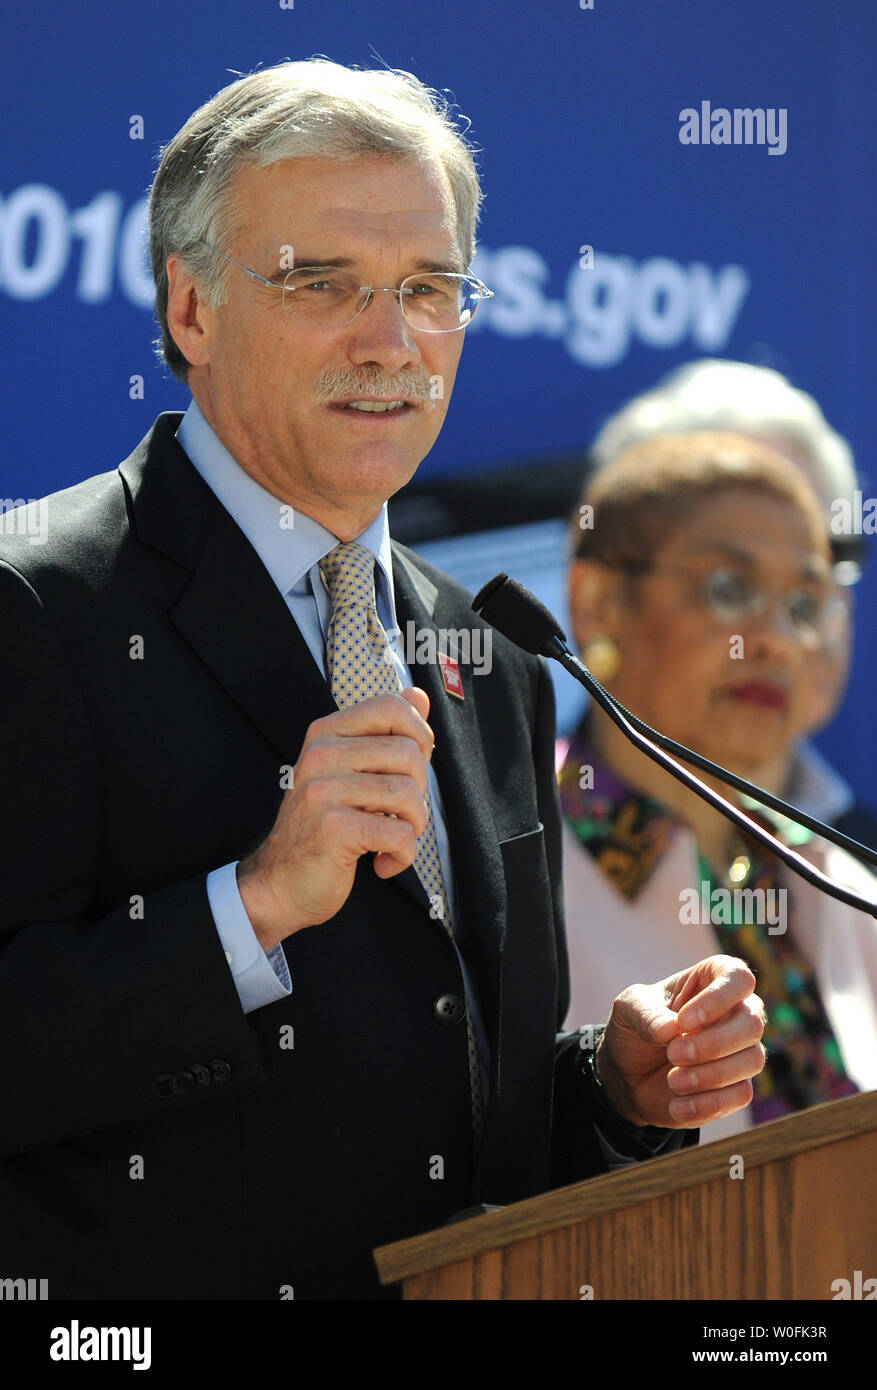 Census Director Robert M. Groves speaks at a Census rally in Washington on April 1, 2010. Groves urged D.C. residents to complete their Census forms so future funding could be better allocated in the District.  UPI/Kevin Dietsch Stock Photo